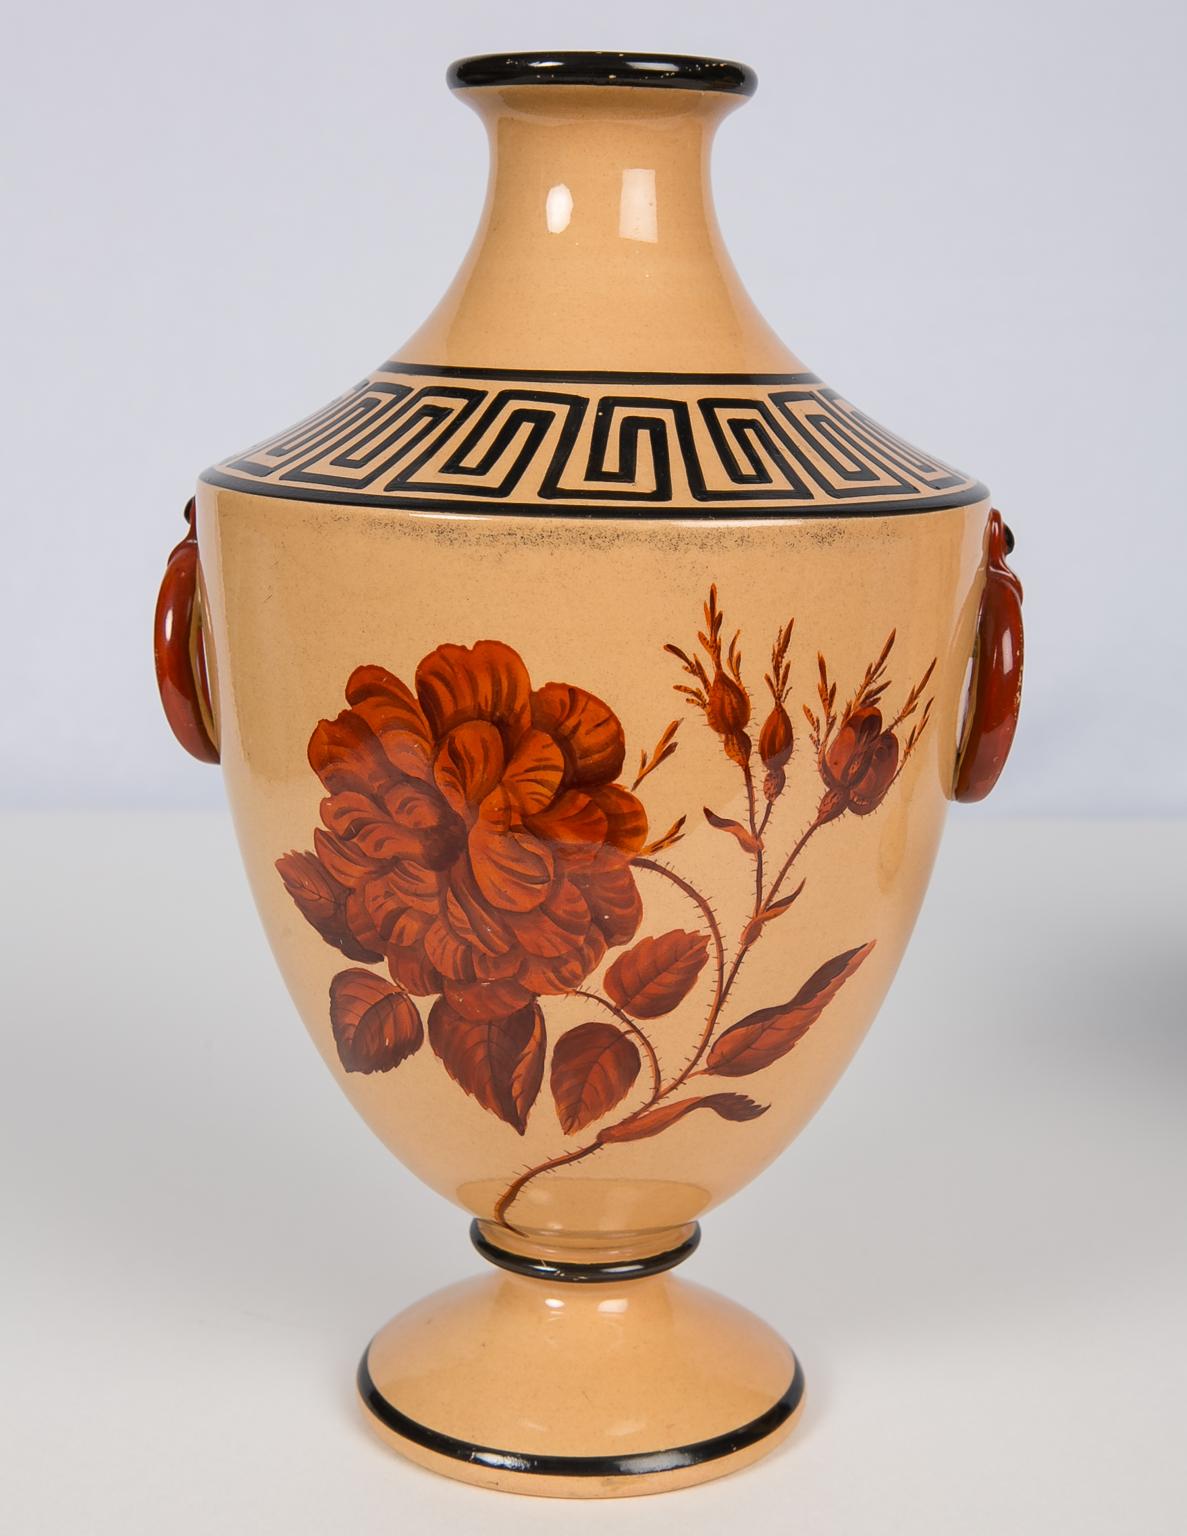 Earthenware Vases with Large Red Flowers and Greek Key Decoration